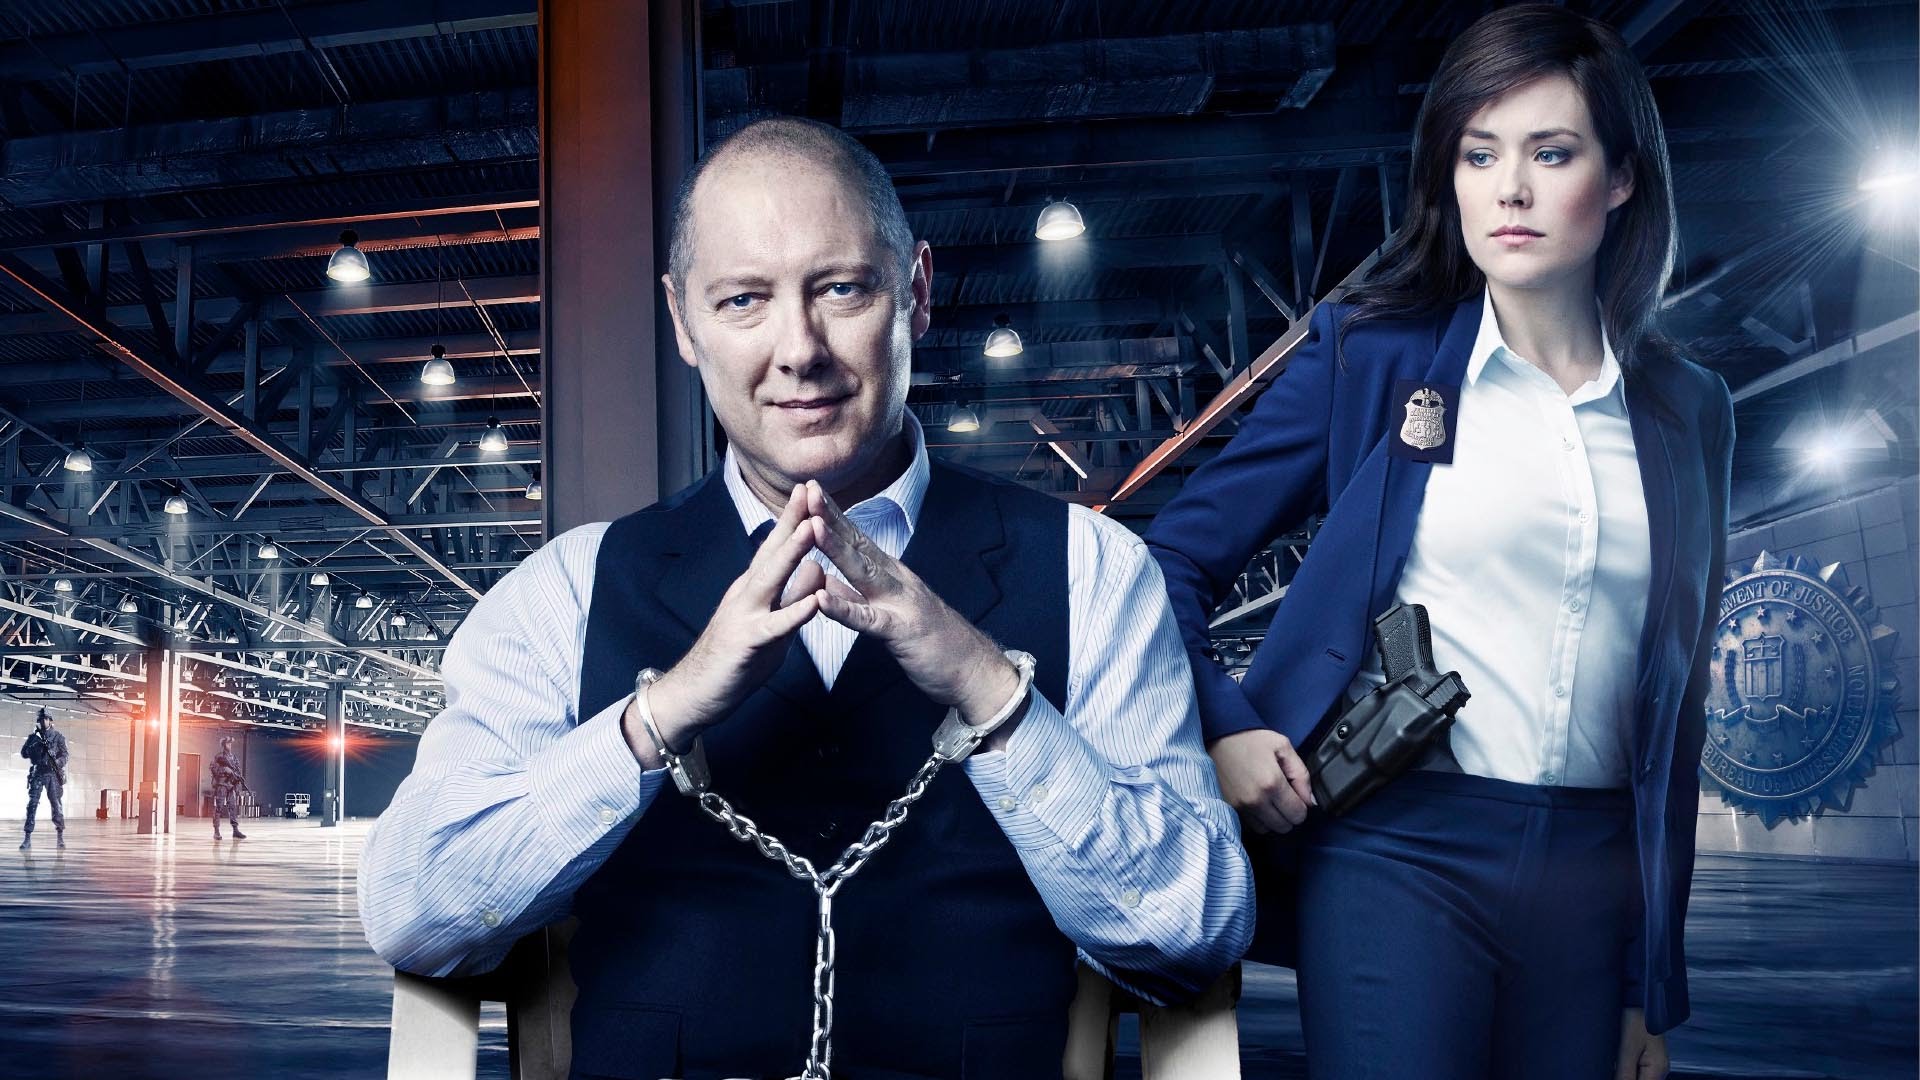 Nice Images Collection: The Blacklist Desktop Wallpapers